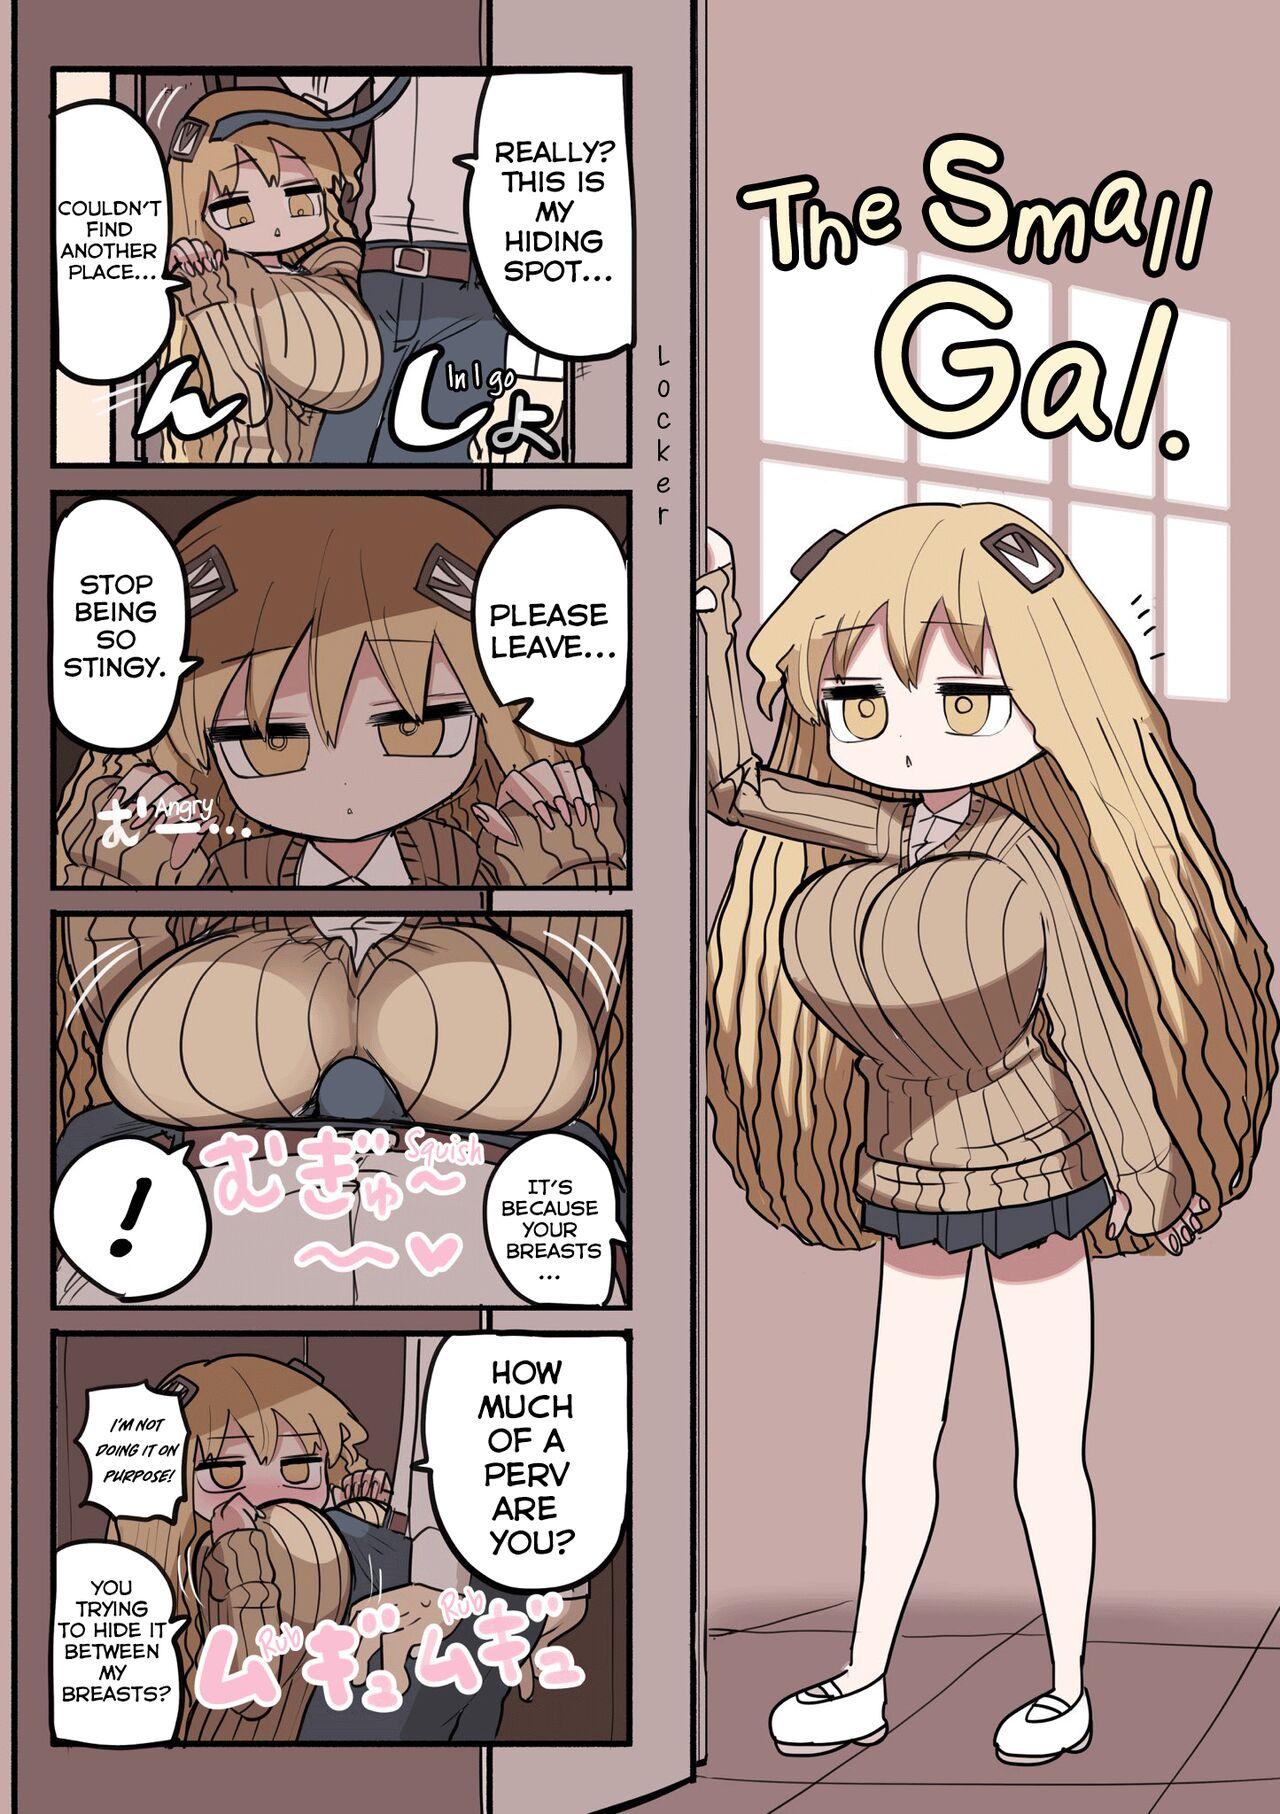 Real Orgasms Chisai Gal | Small Gal Time - Page 11